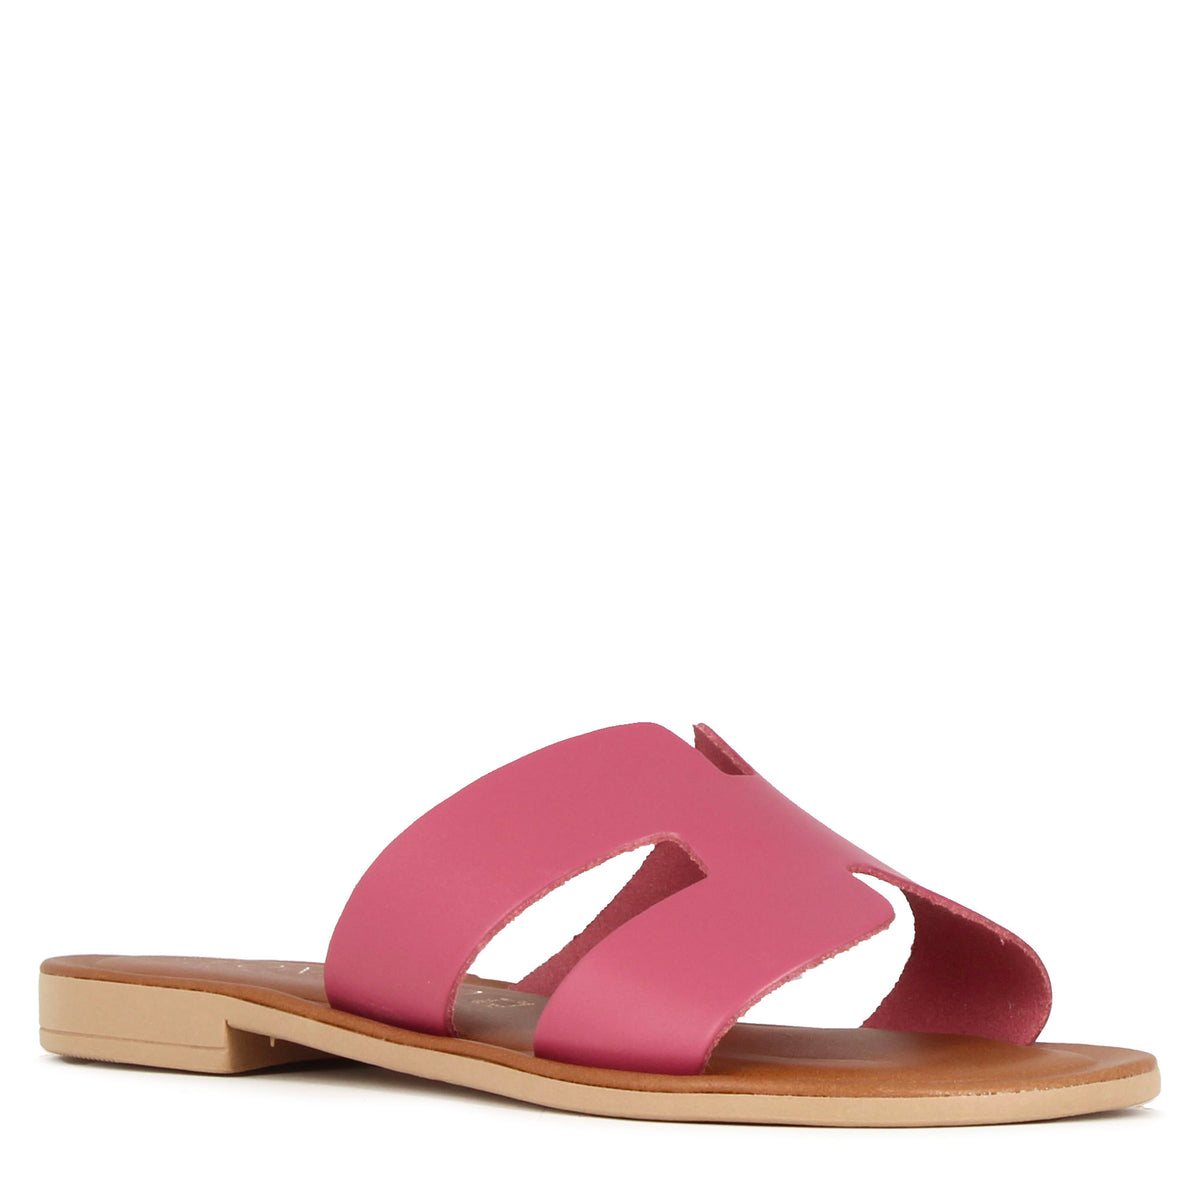 Pink leather women's slippers